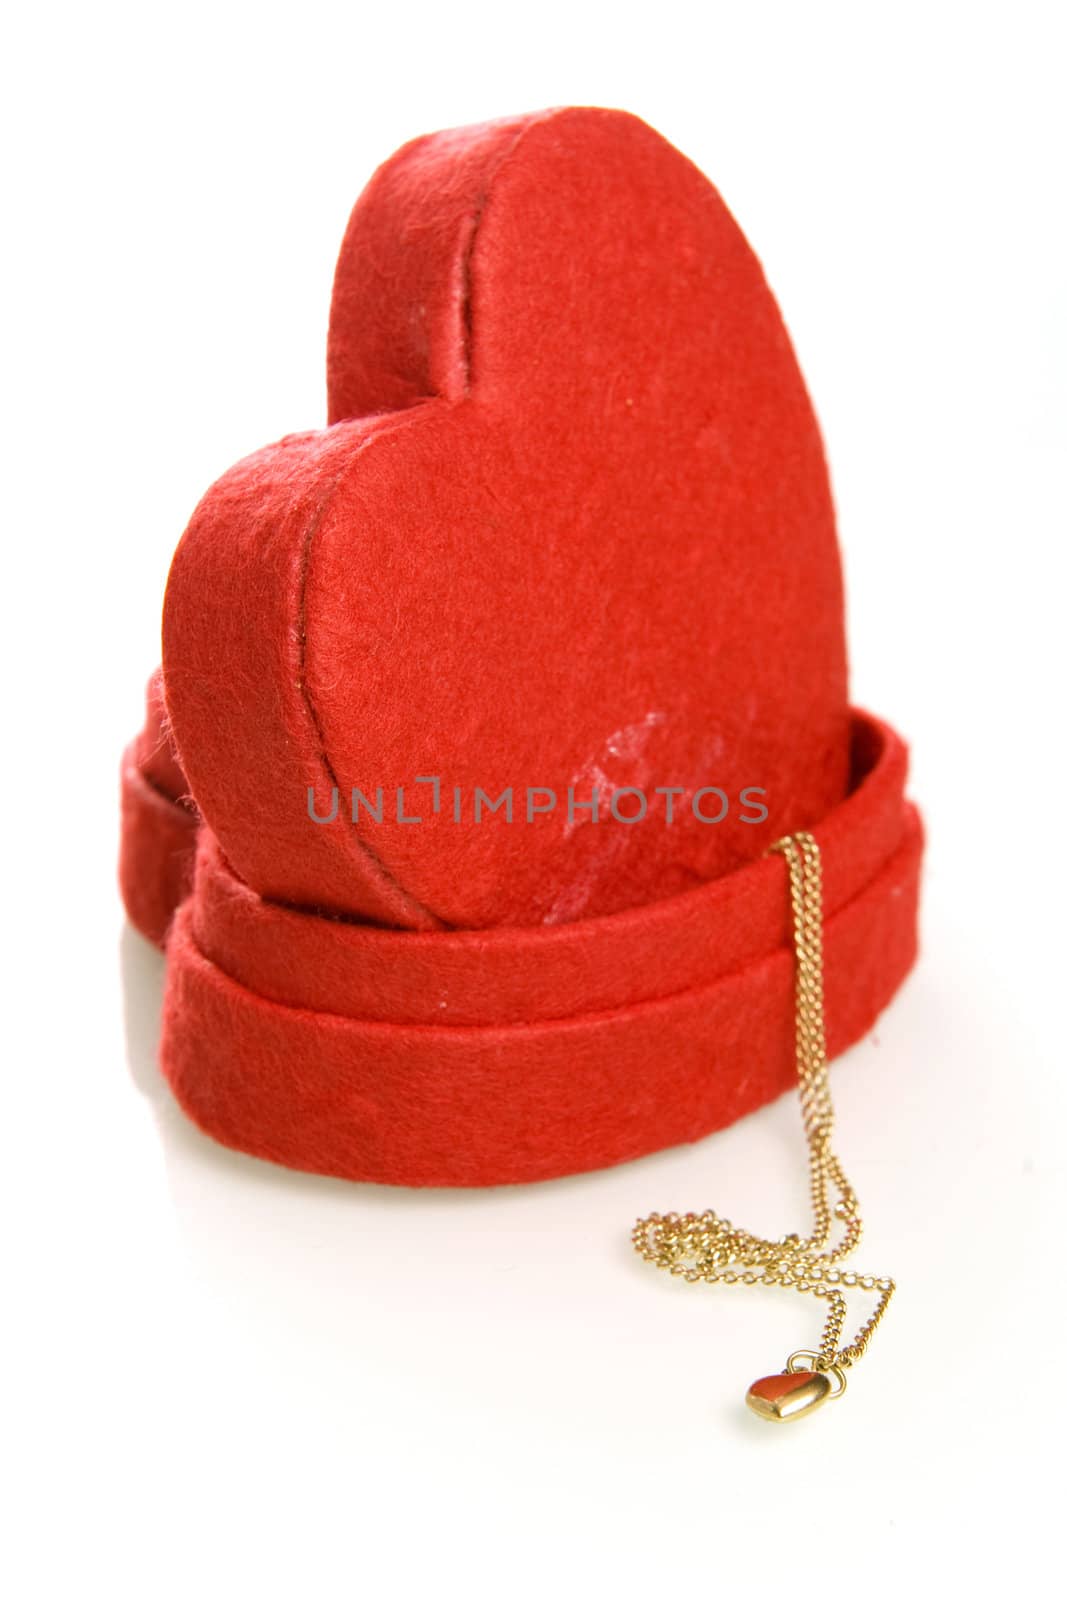 a red heart box with a golden heart on a white background